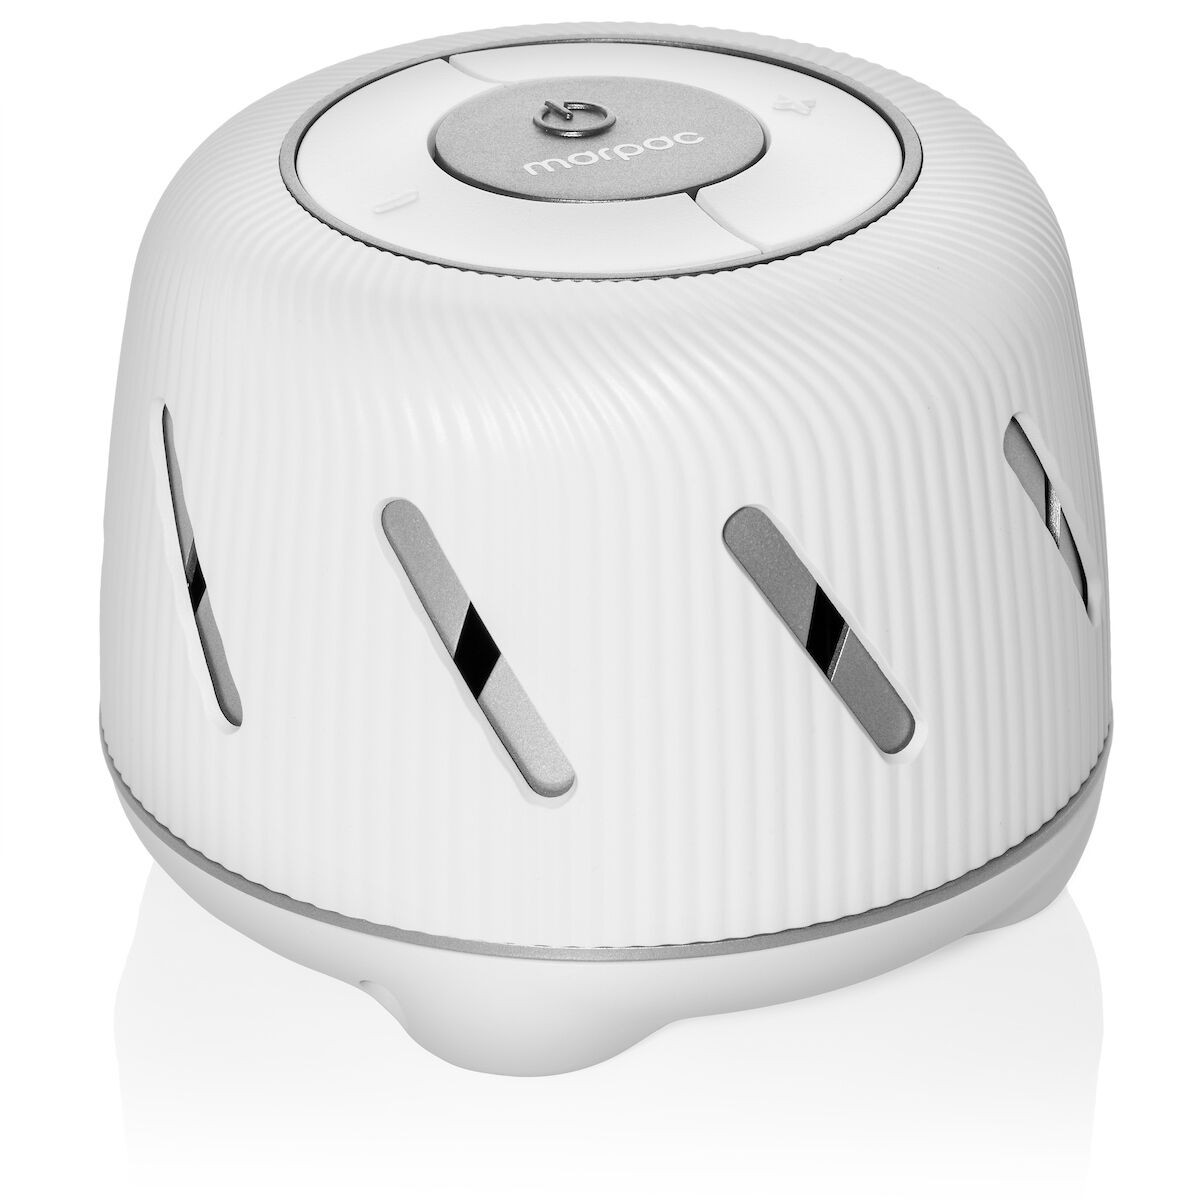 Marpac Dohm Connect White Noise Sound Machine with App Control